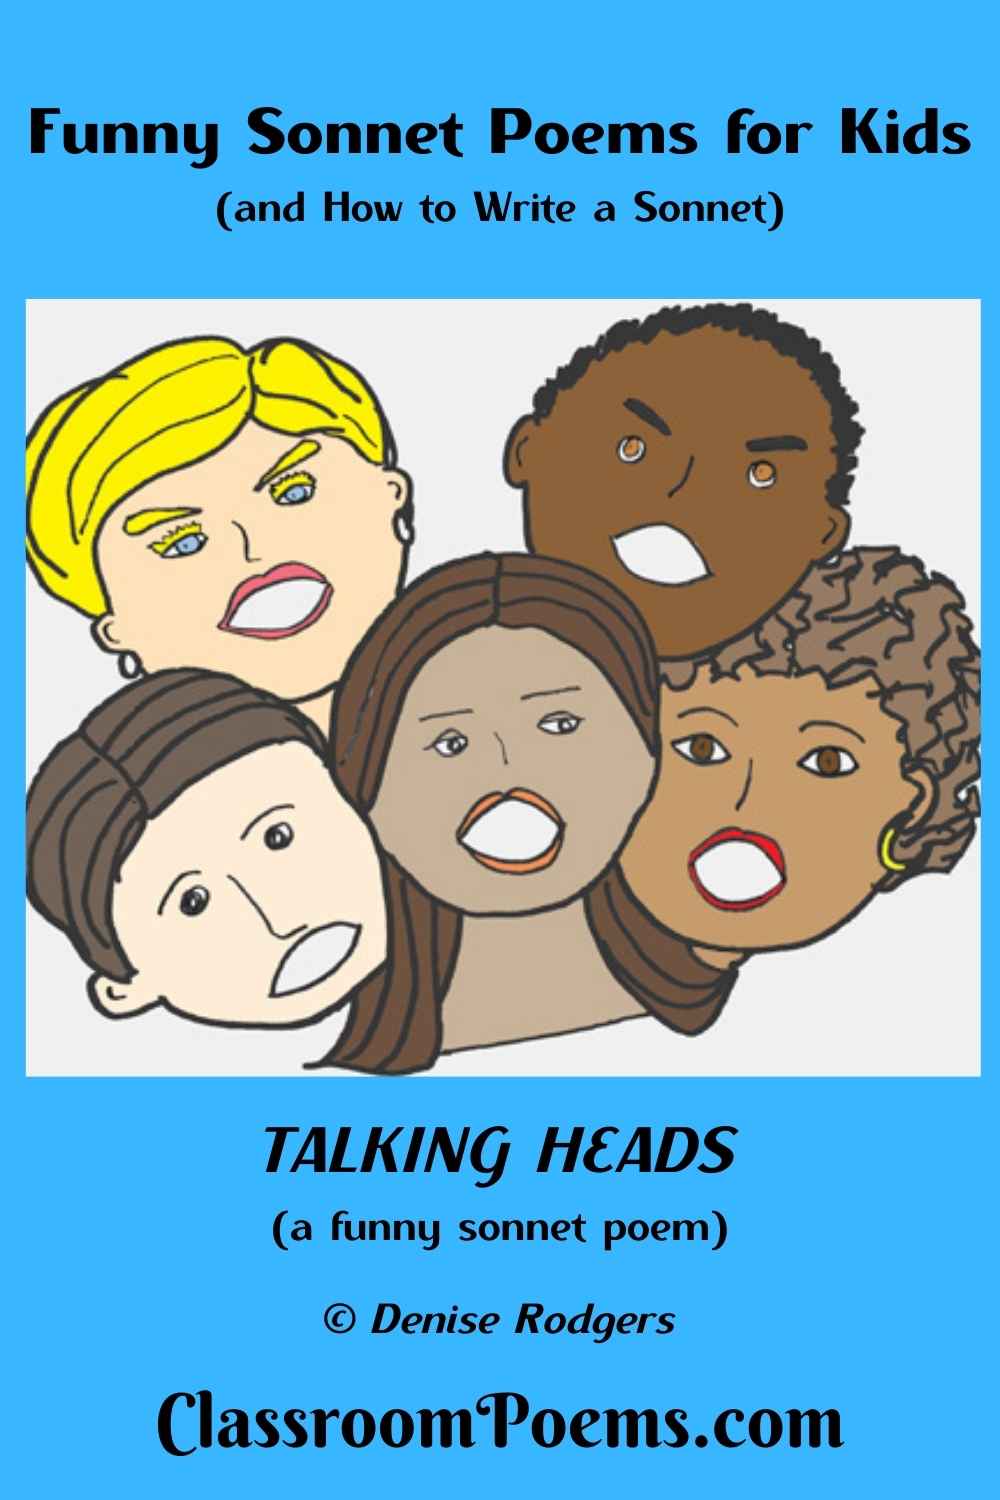 TALKING HEADS, a funny sonnet poem by The Poetry Lady Denise Rodgers on ClassroomPoems.com.